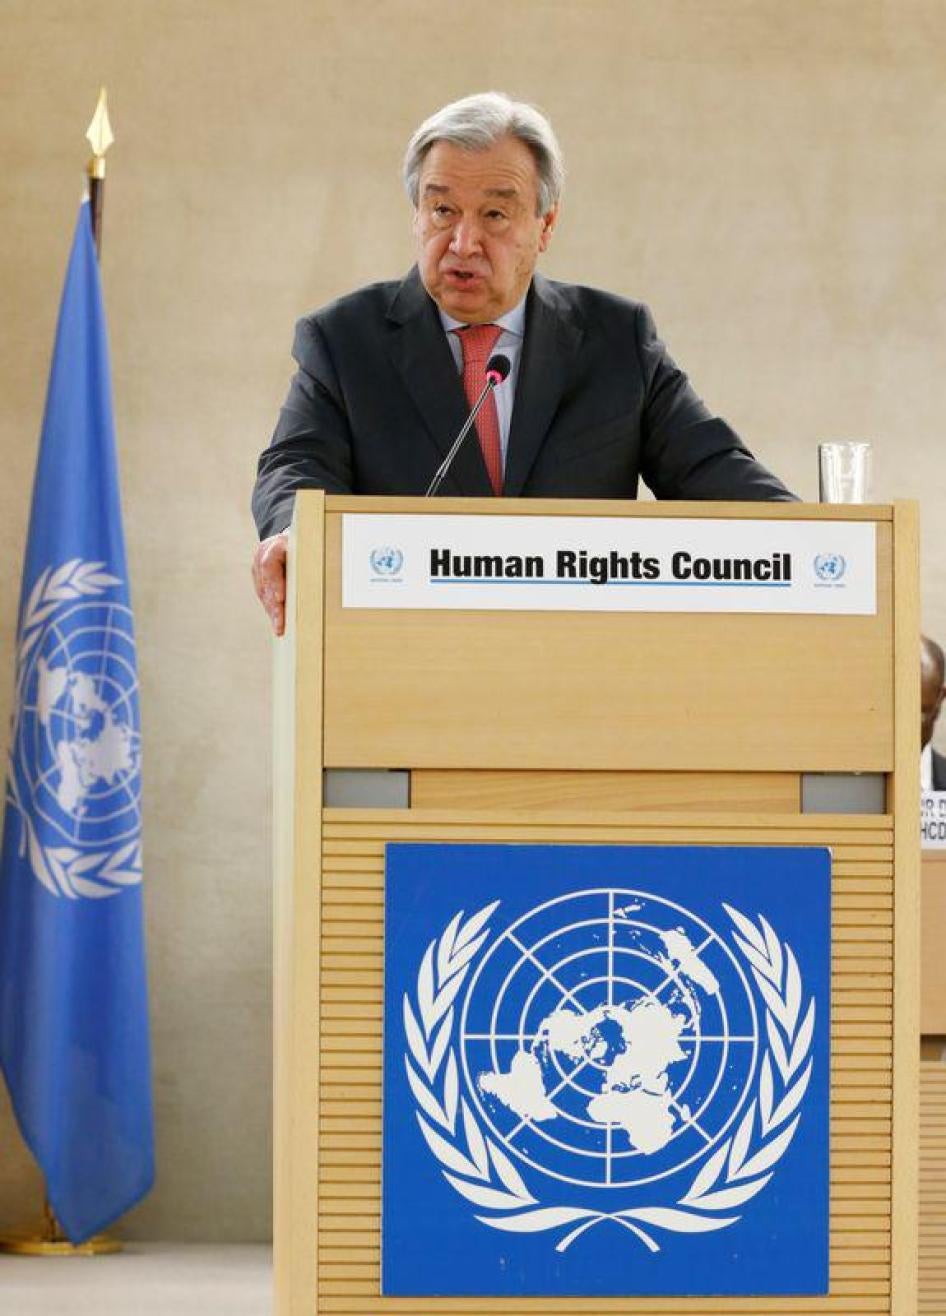 UN Secretary-General Antonio Guterres addresses the 34th session of the Human Rights Council in Geneva, February 27, 2017.